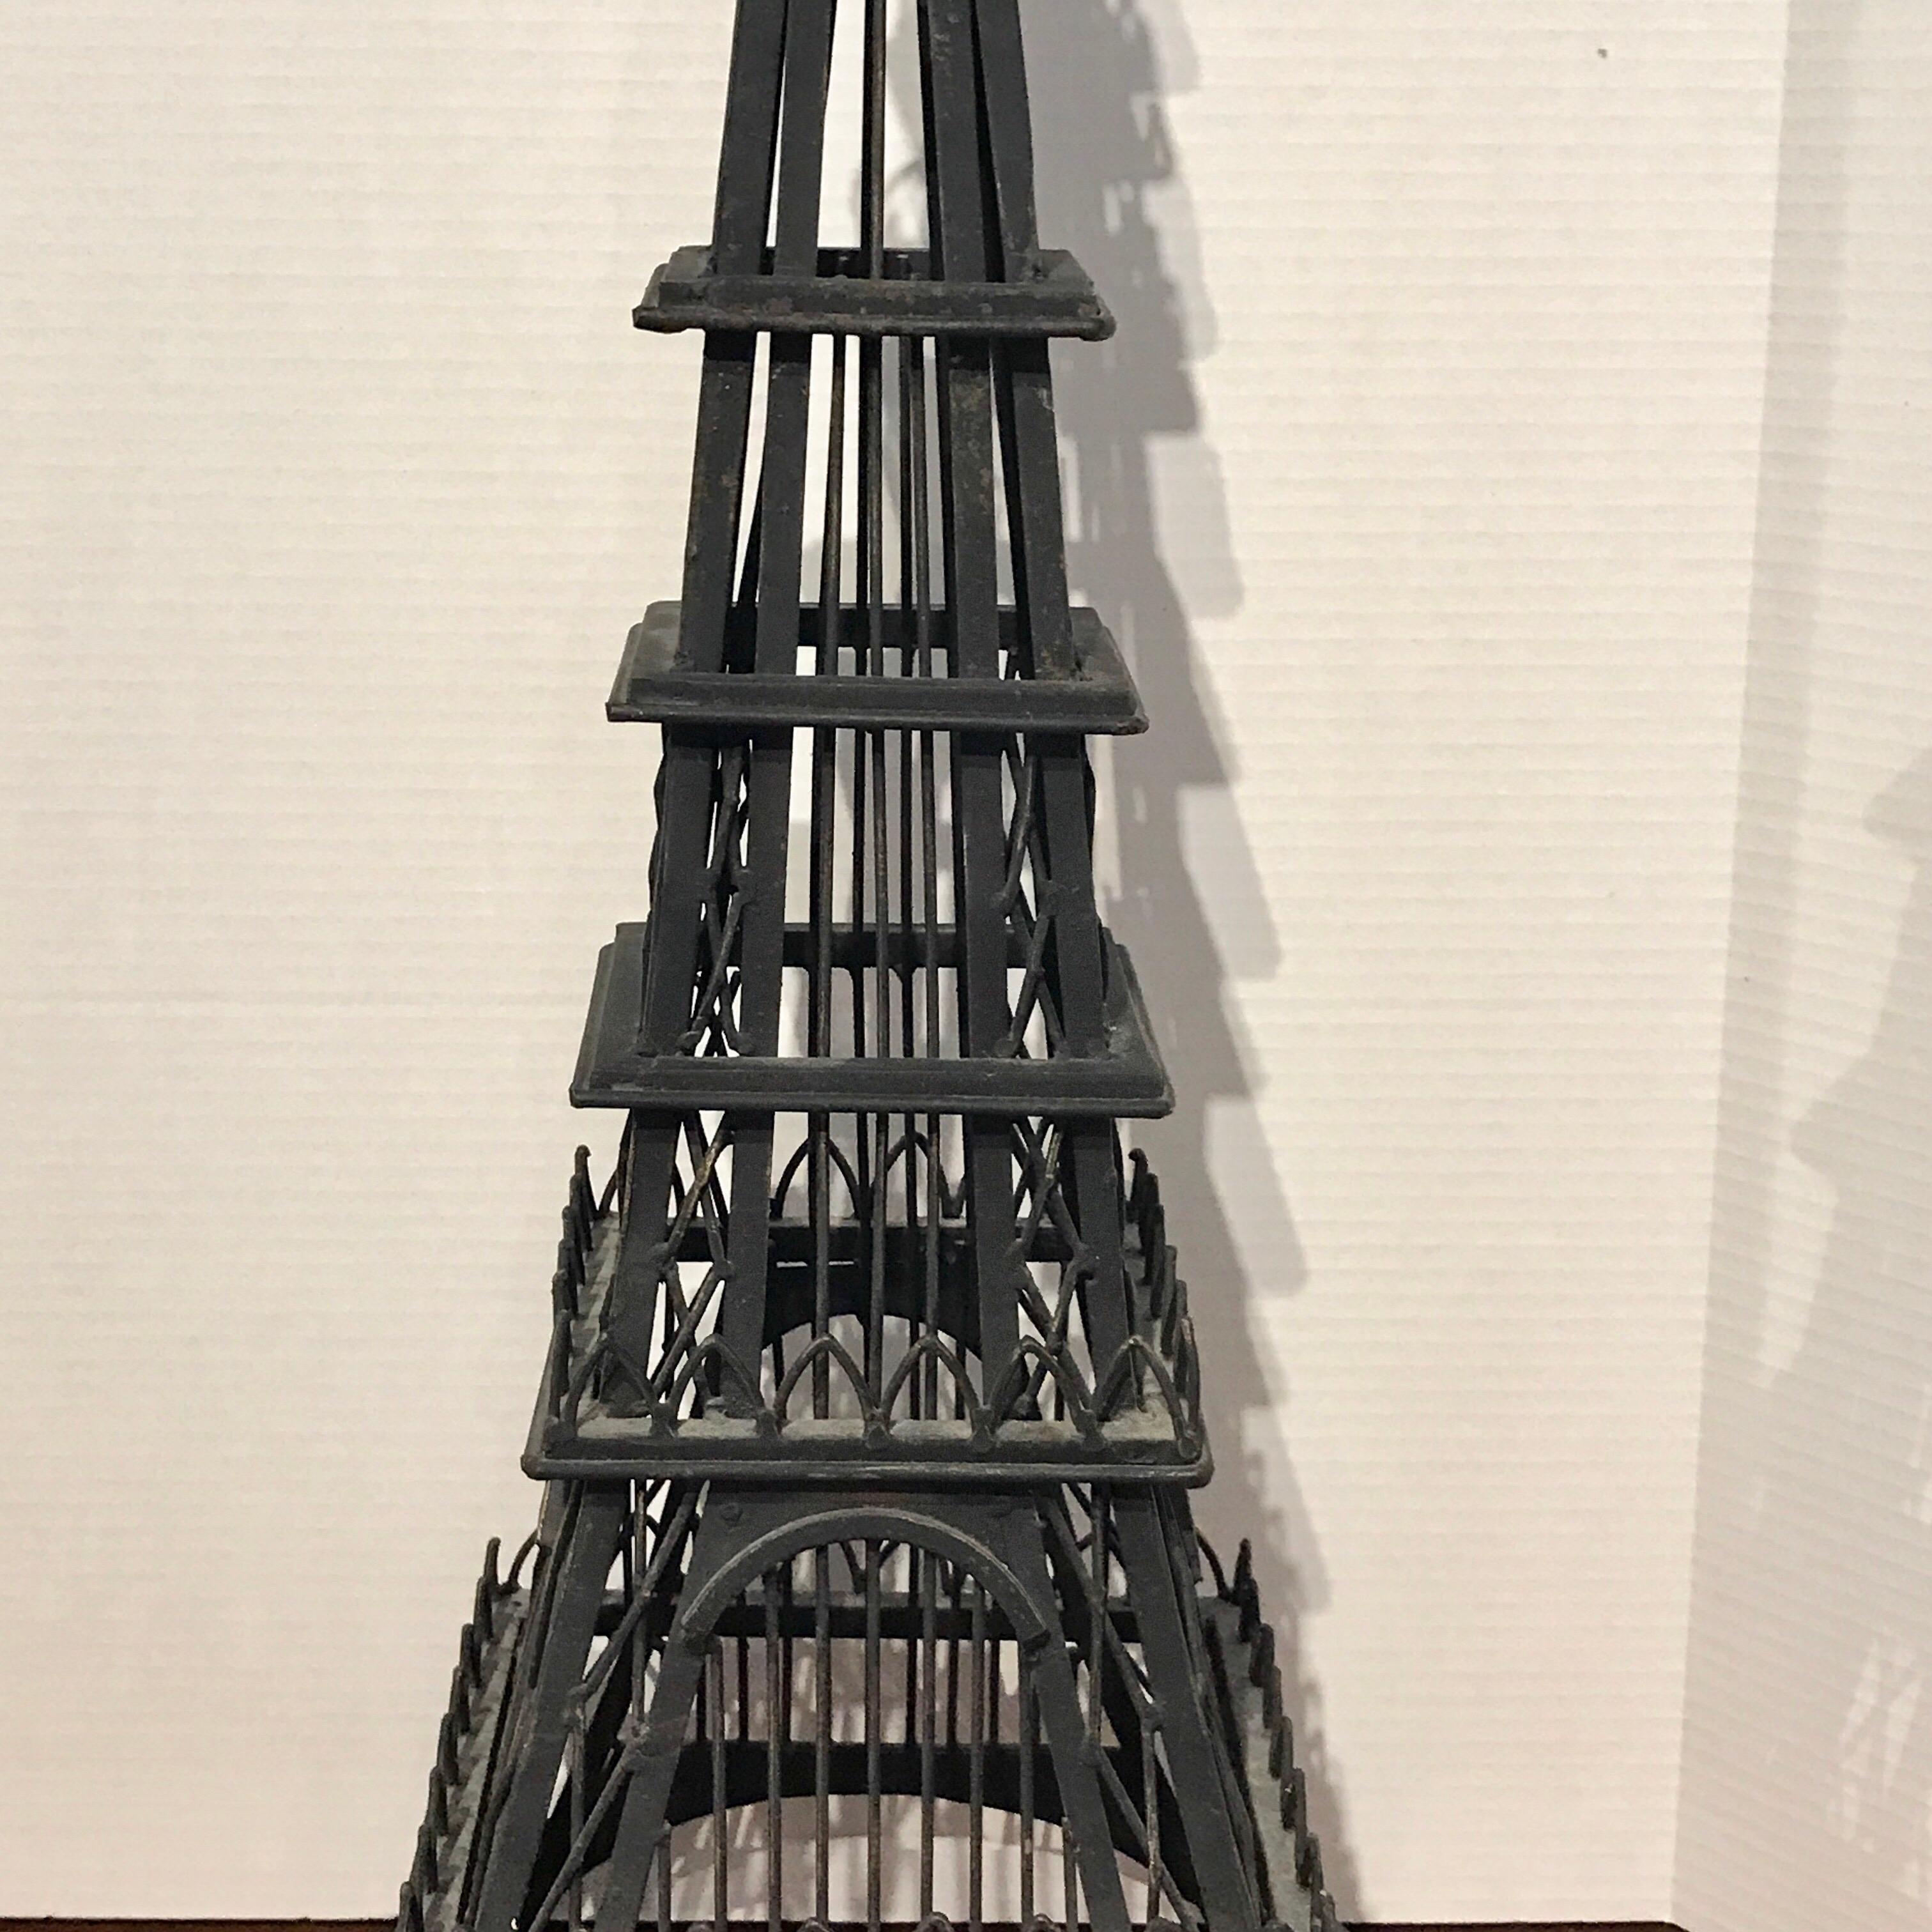 Grand Tour model of the Eiffel Tower, now as a lamp, newly wired. The architectural model stands 30